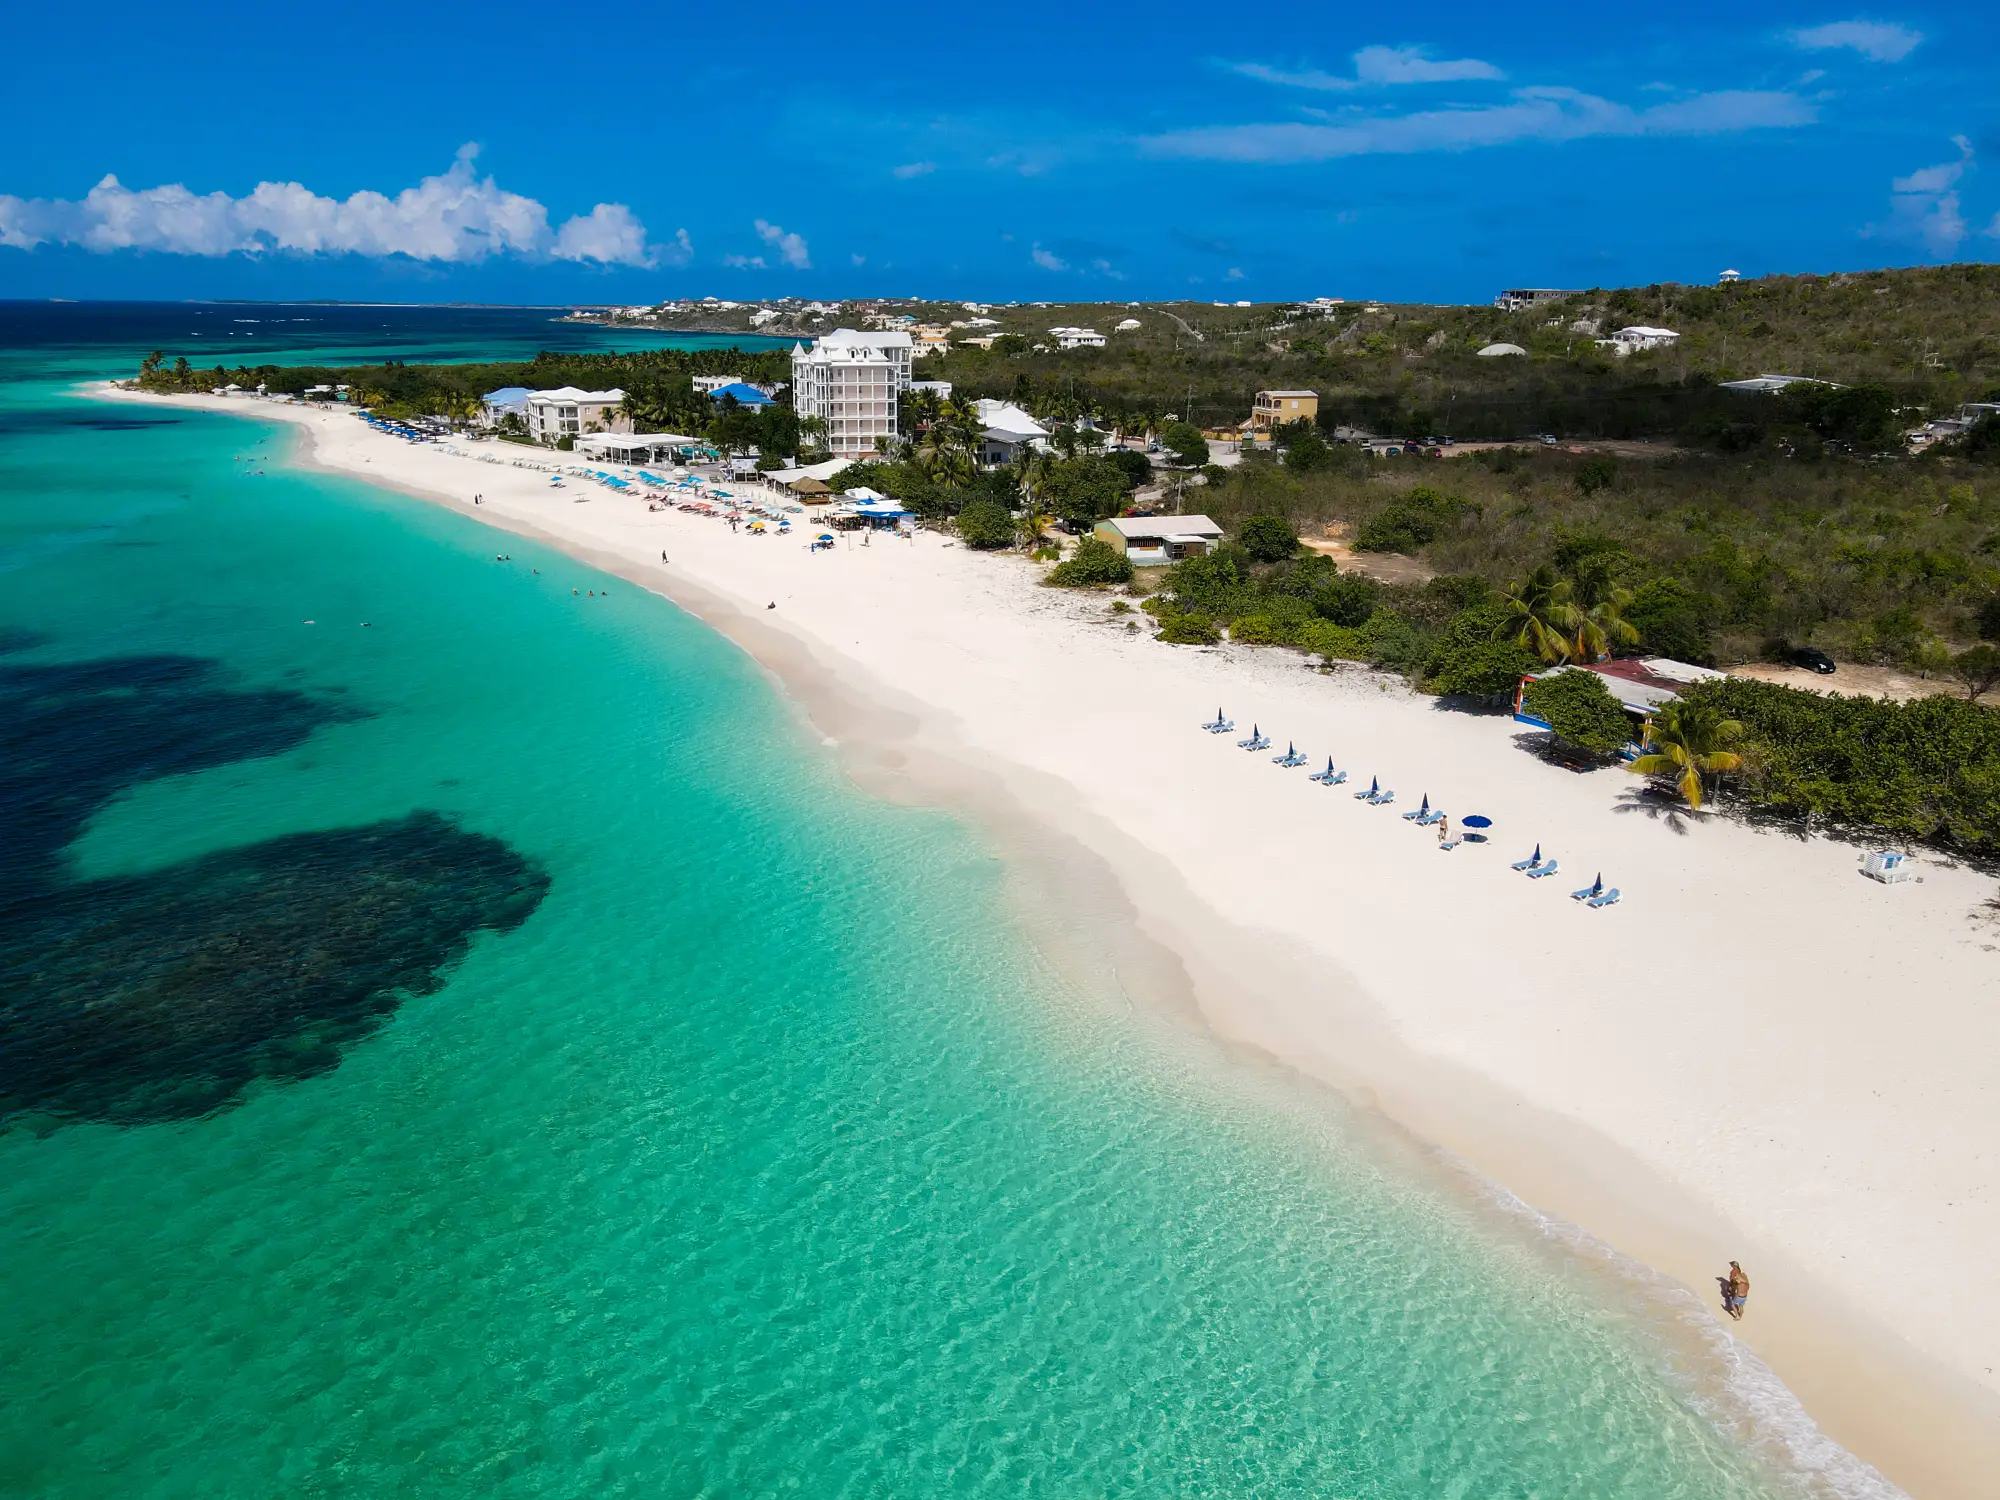 Enjoy the beach at our vacation rentals in anguilla